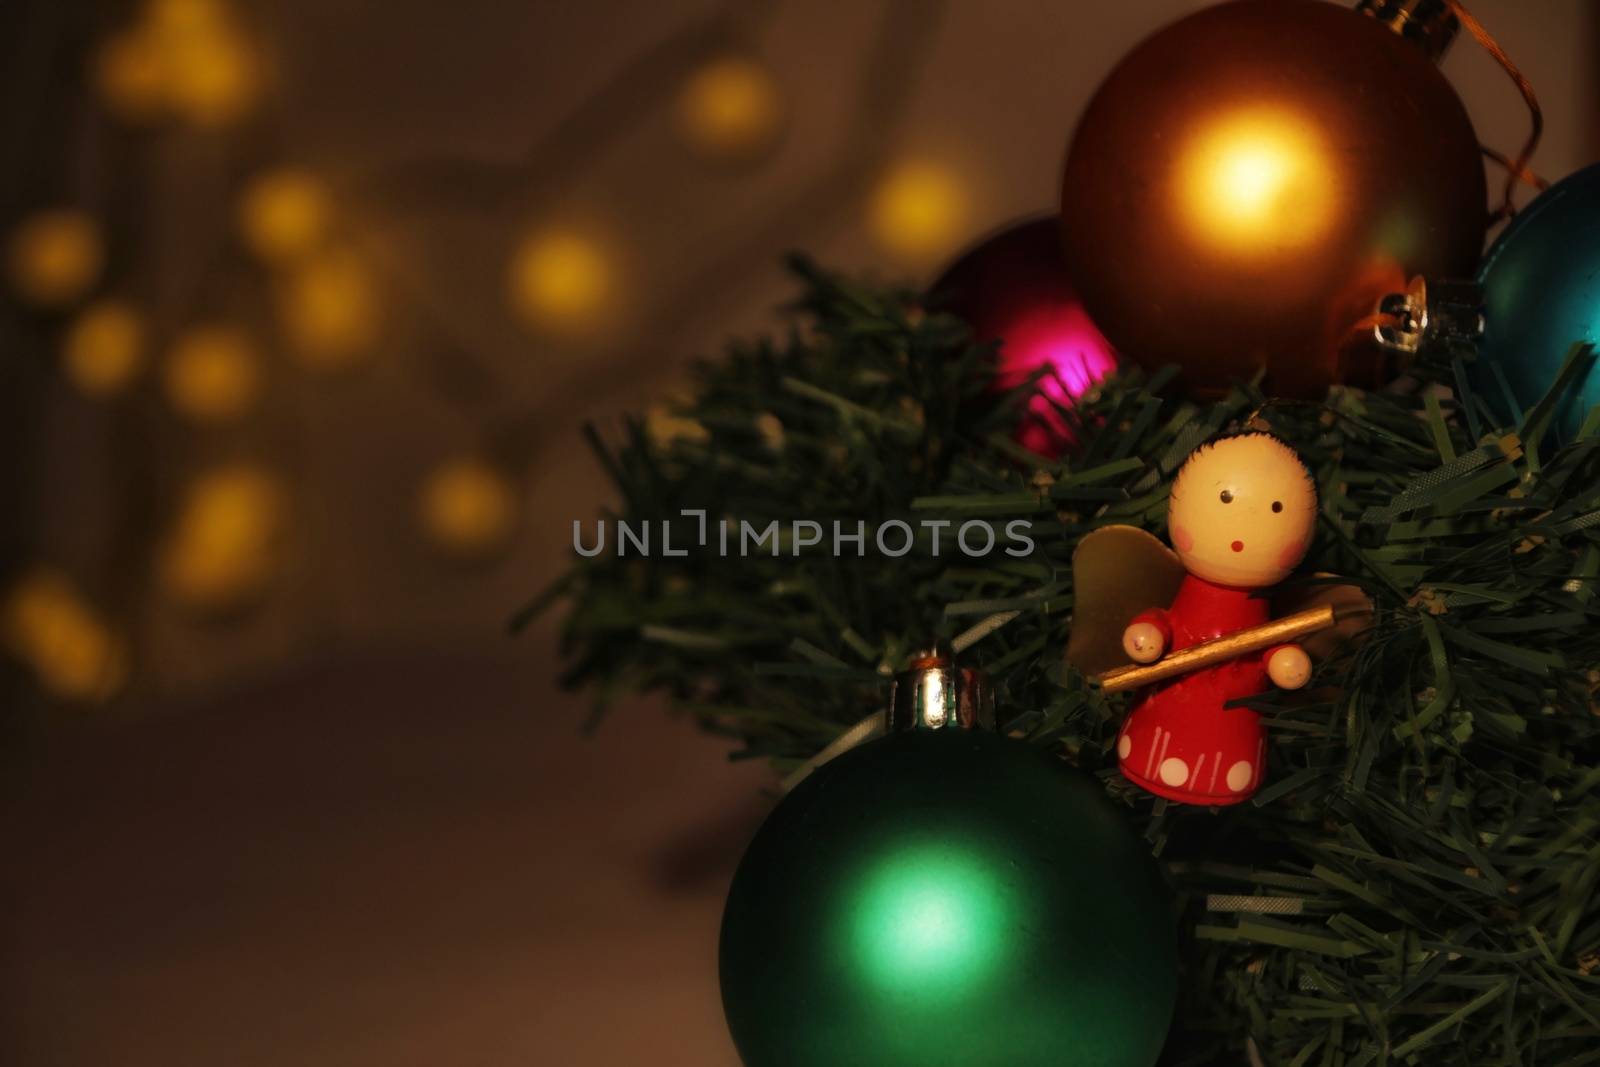 Angel Christmas ornament, Christmas tree balls, garlands and other colorful decorative elements